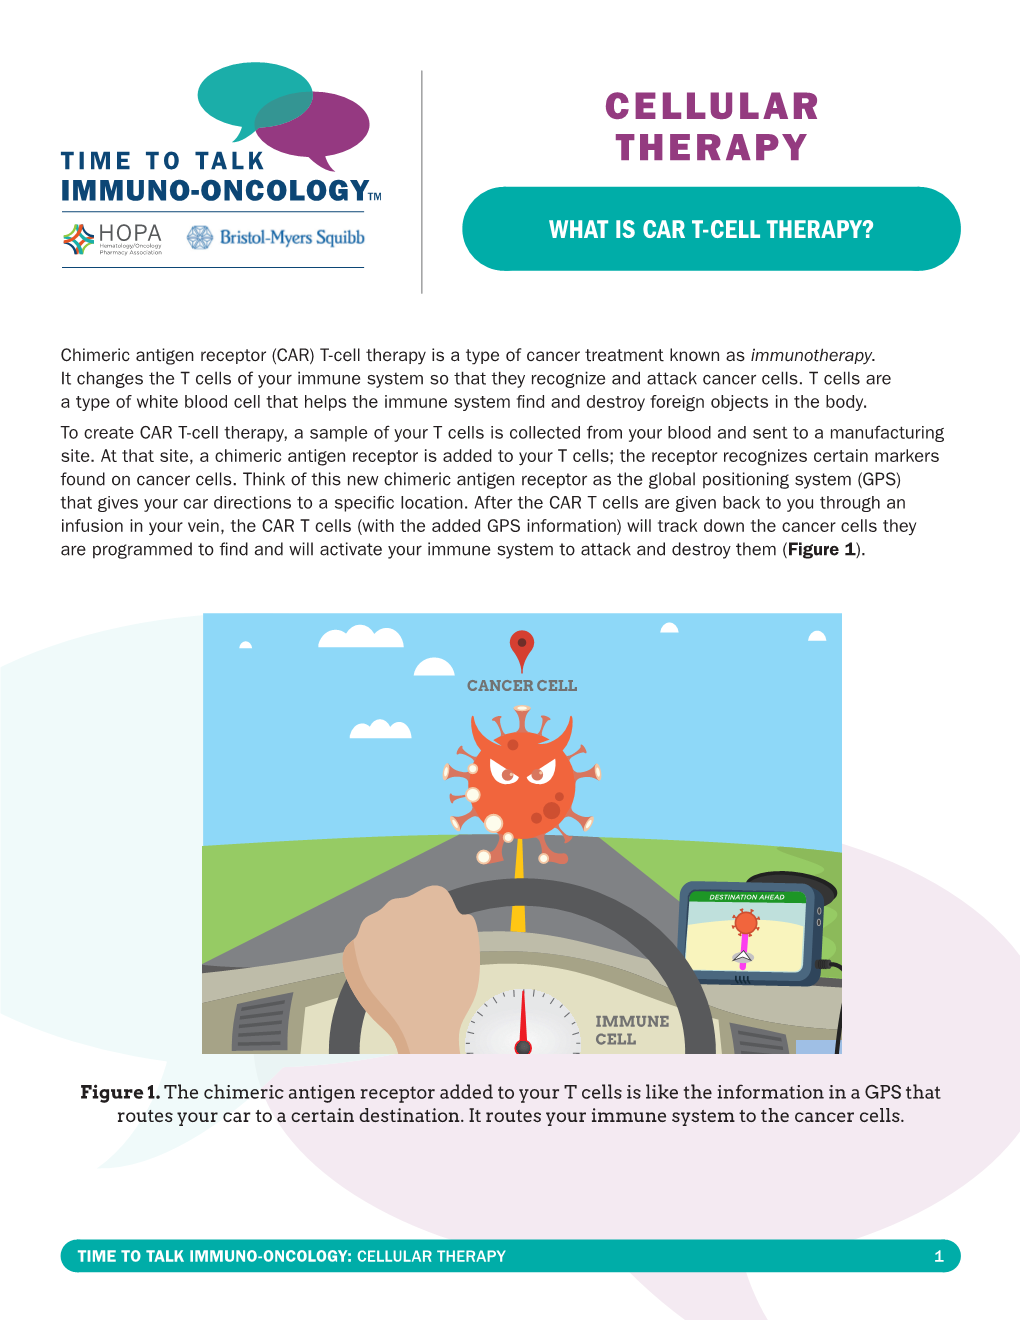 WHAT IS CAR T-CELL THERAPY? Hematology/Oncology Pharmacy Association